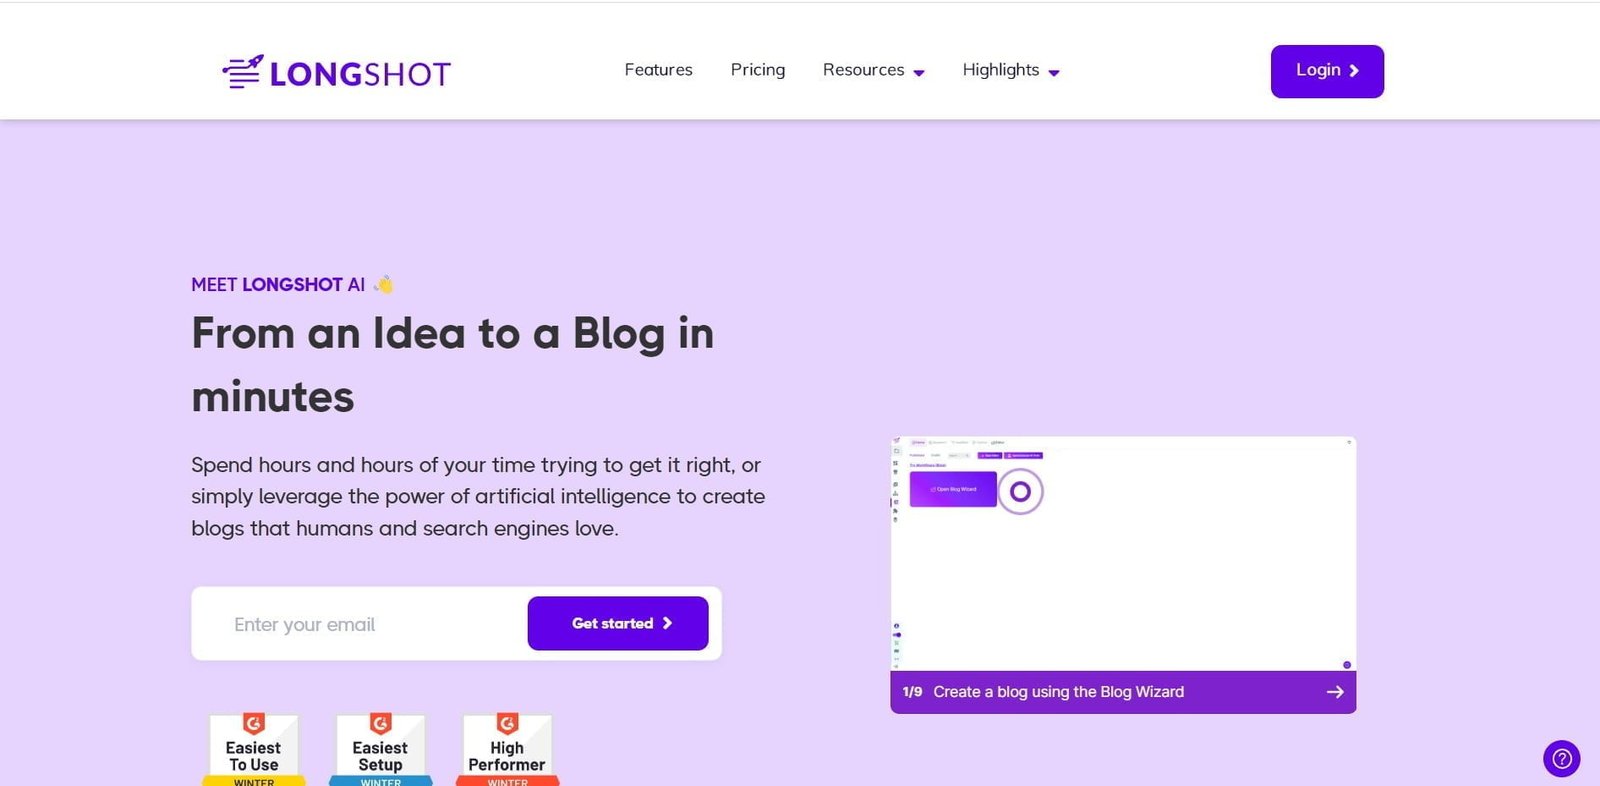 Long Shot AI is an AI writing assistant and SEO tool designed to help users research